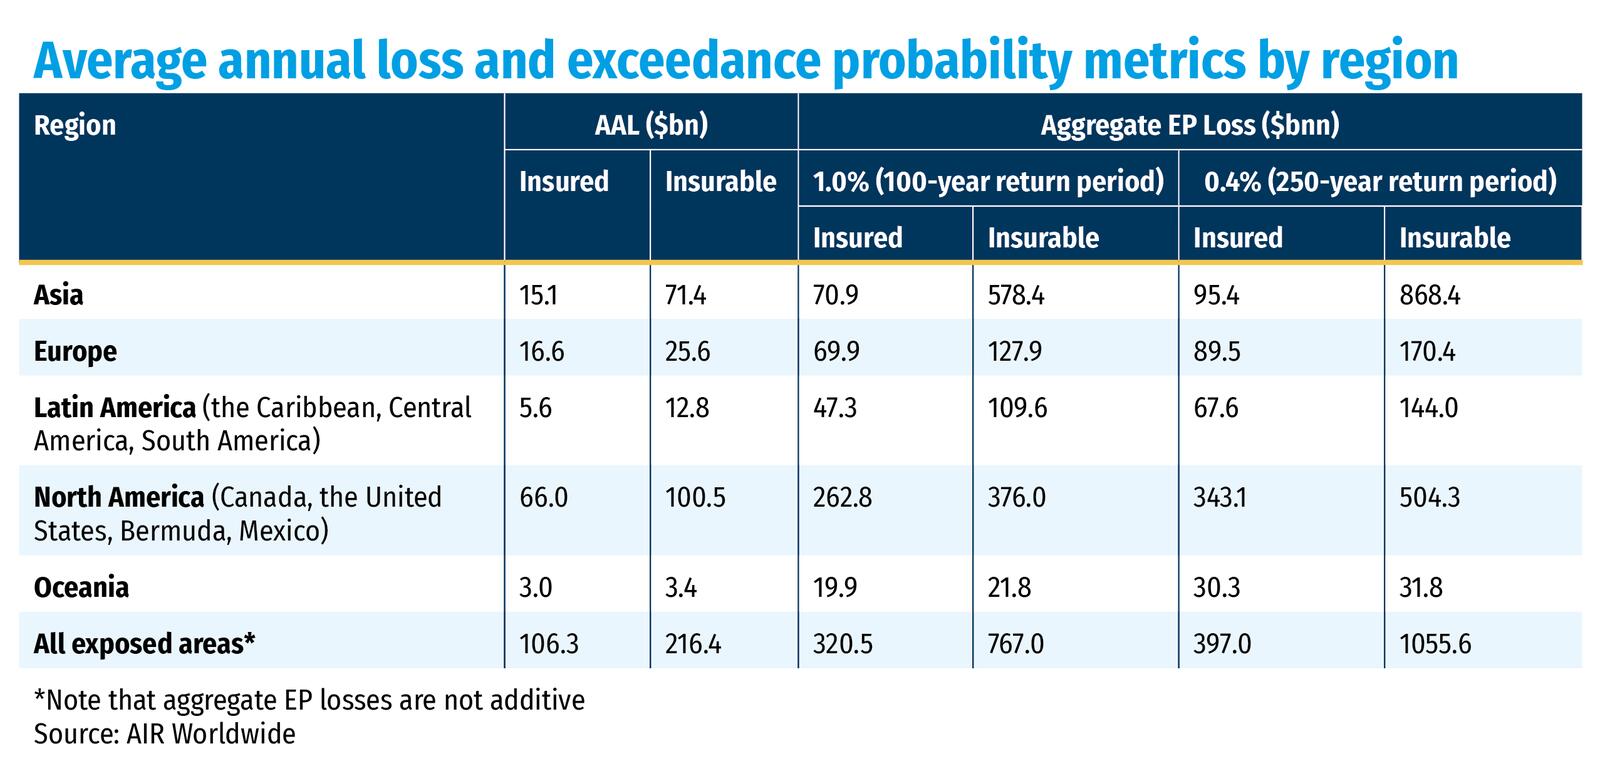 Average annual loss and exceedance probability metrics by region